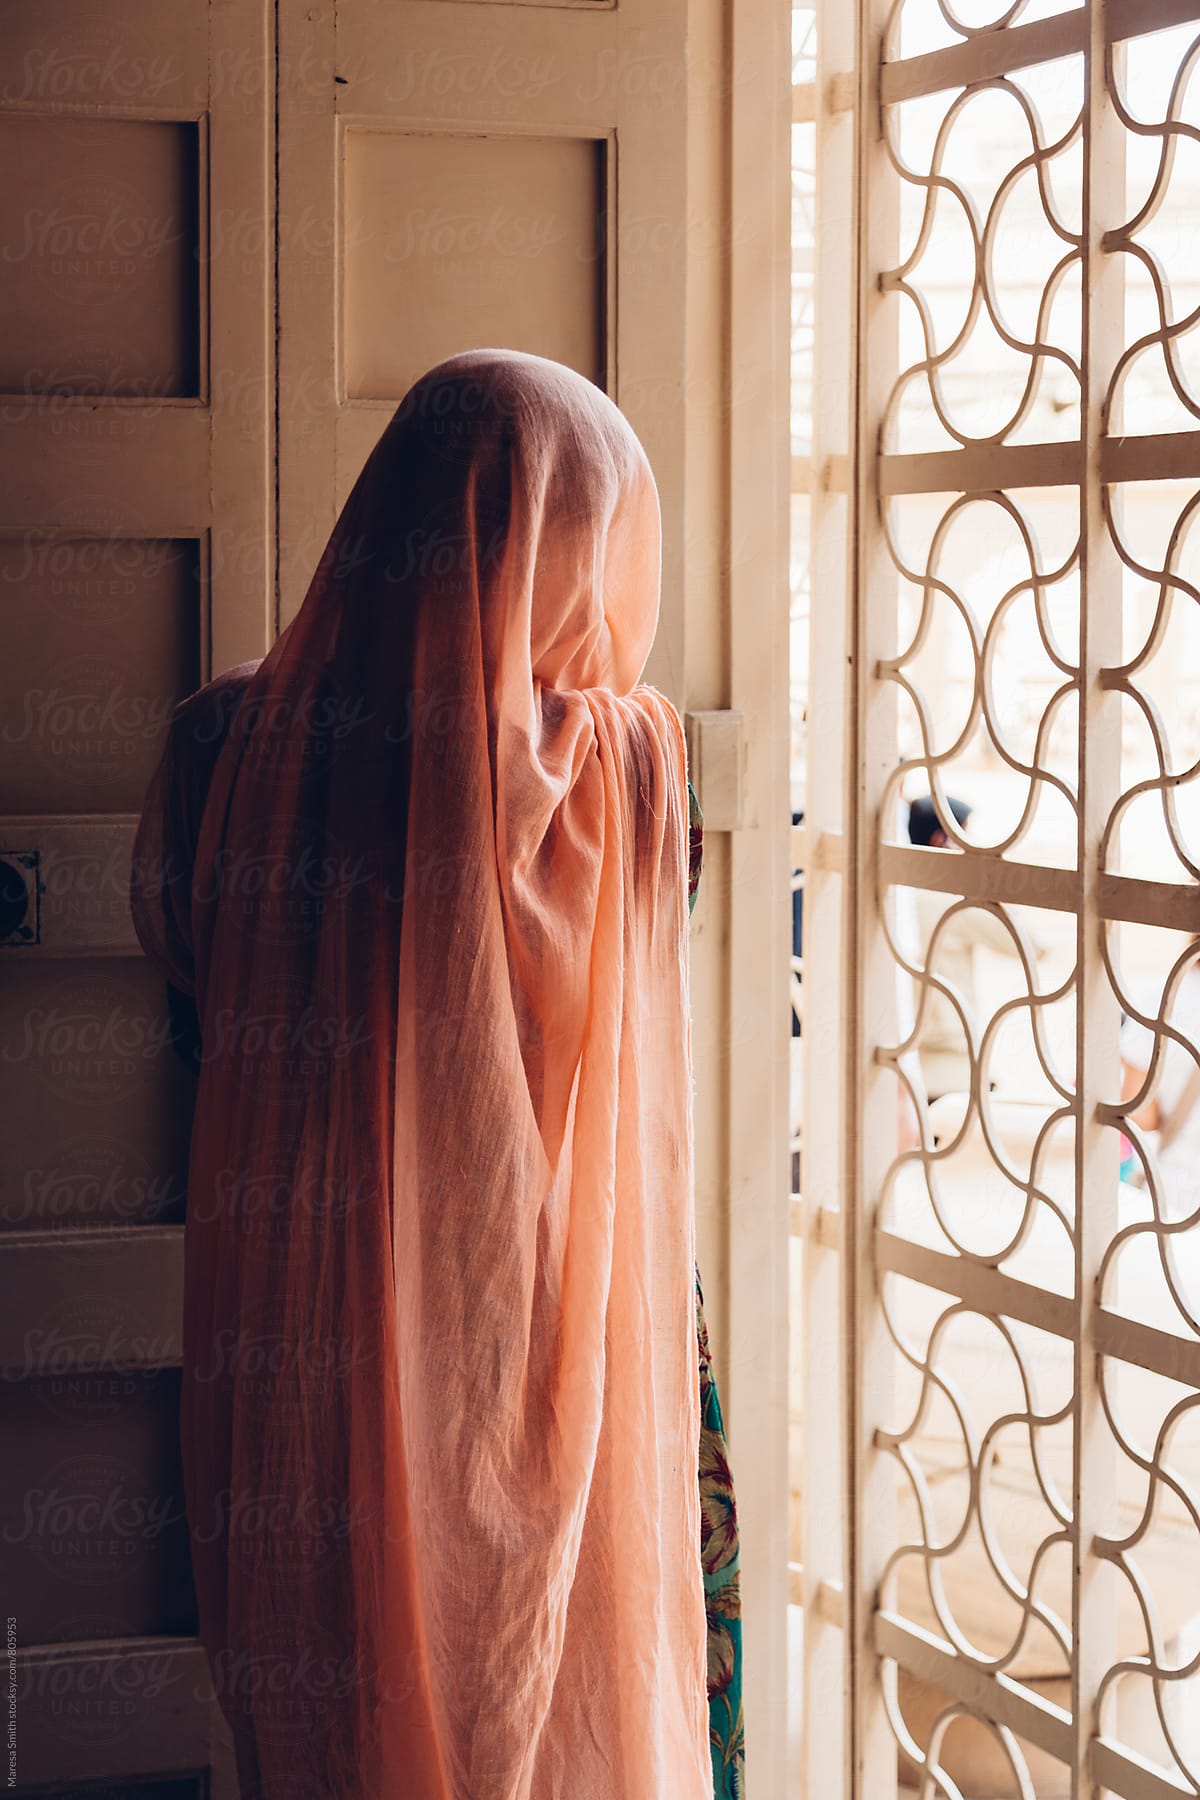 Anonymous women covered in a pale pink sari looking out of a window